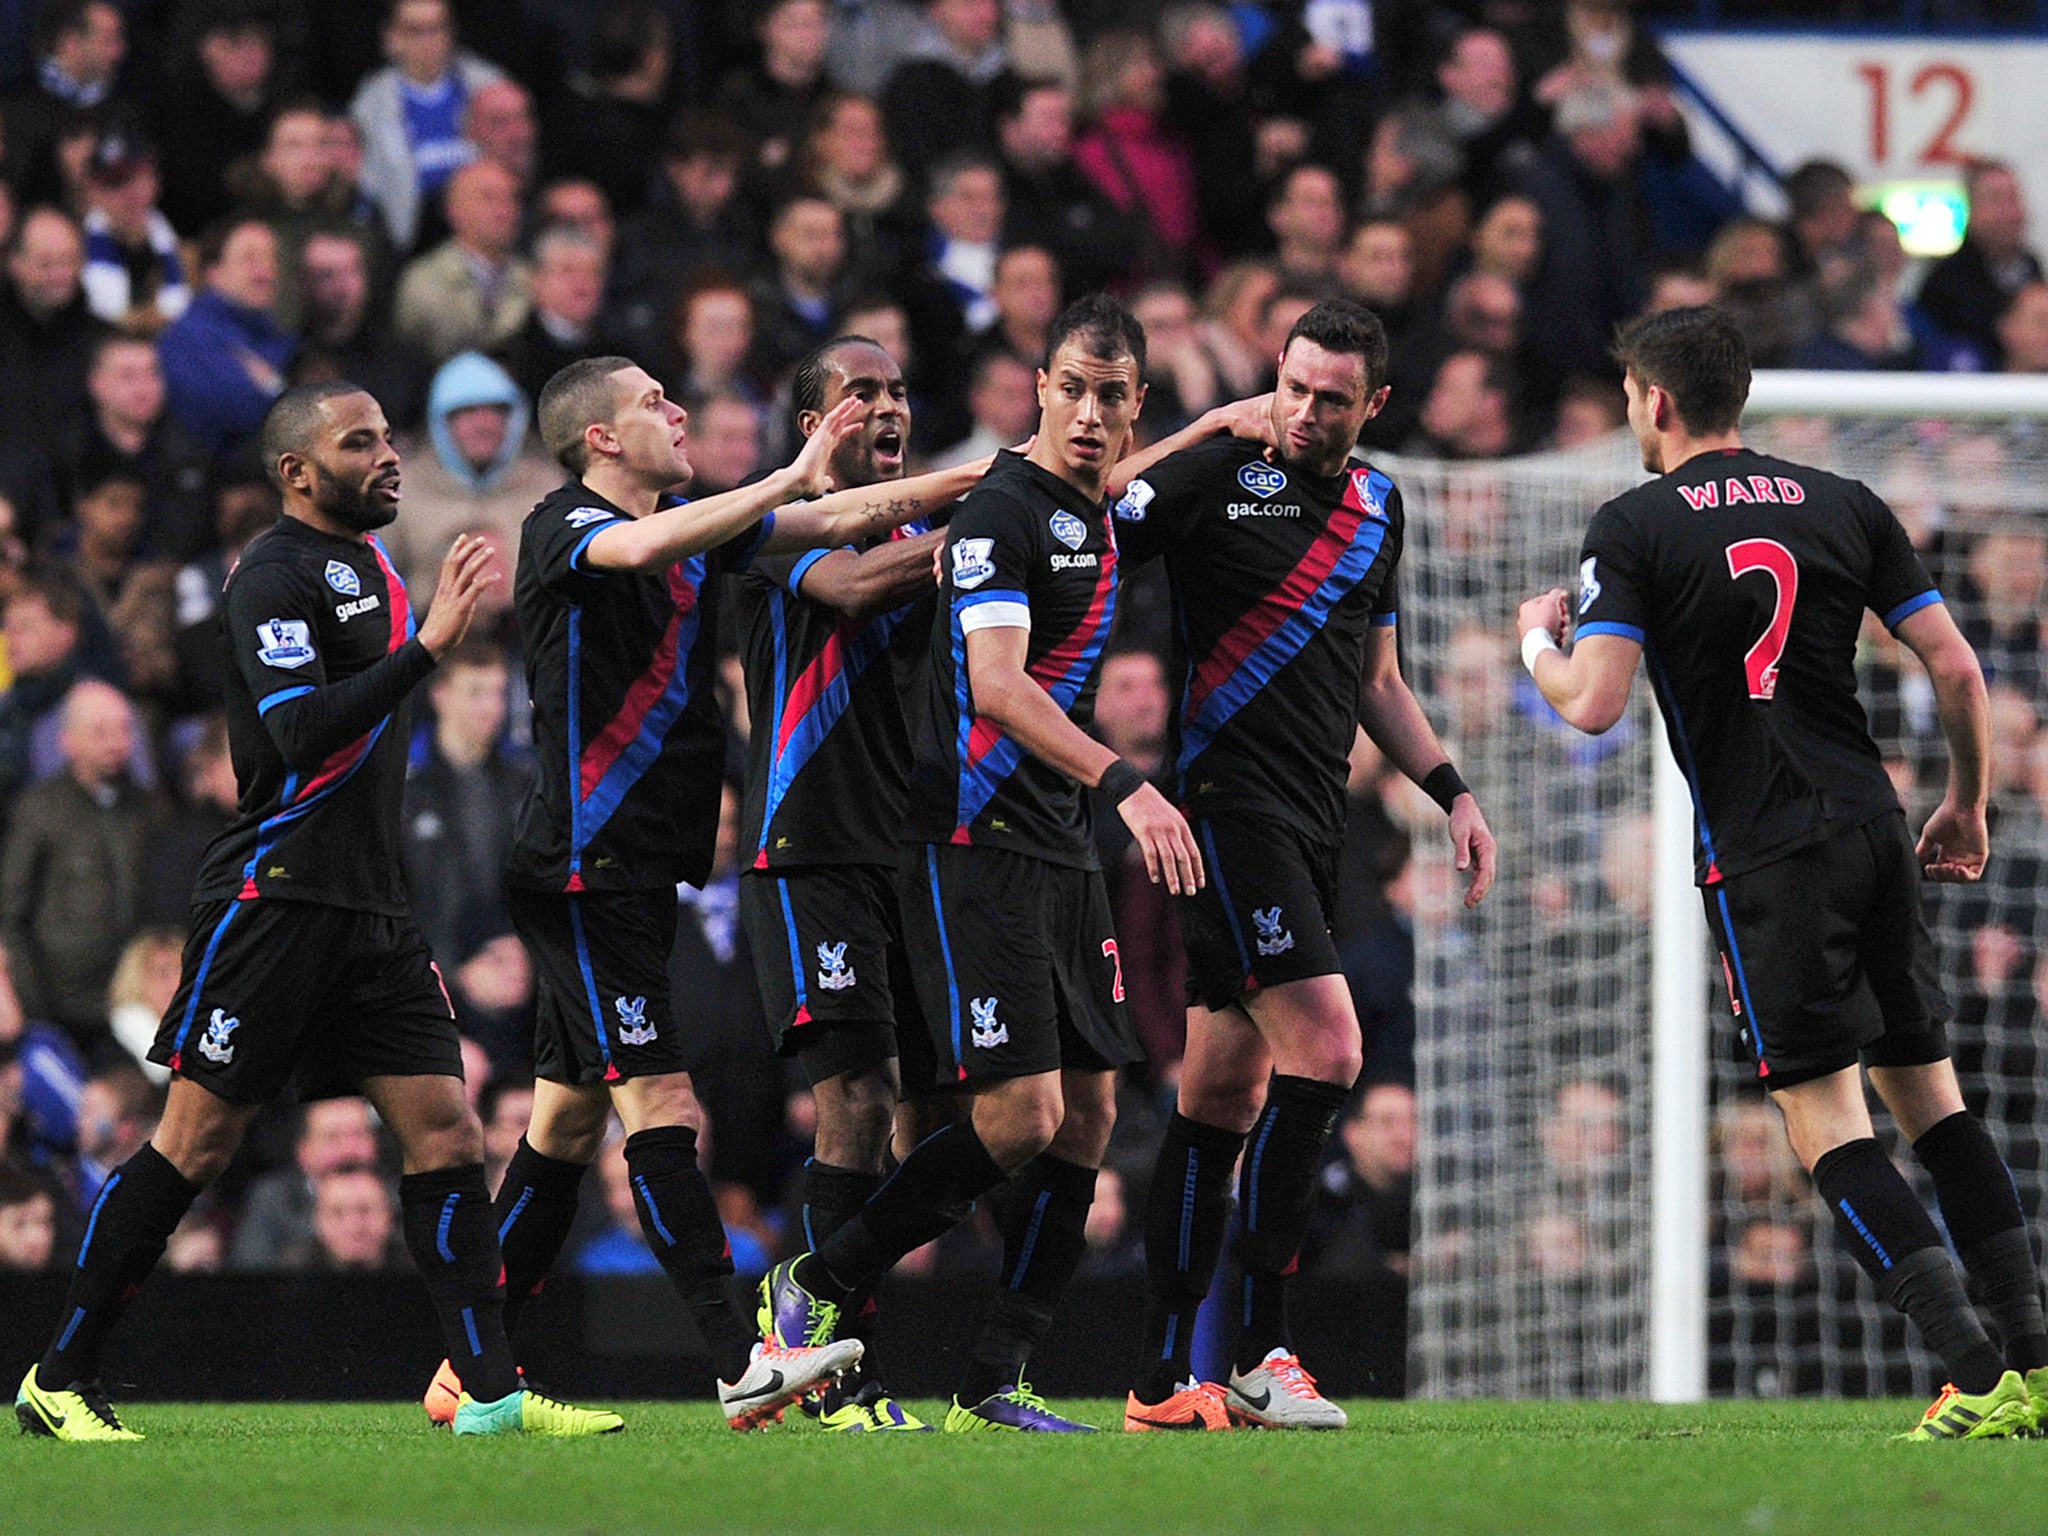 Crystal Palace players celebrate after Marouane Chamakh scores against Chelsea